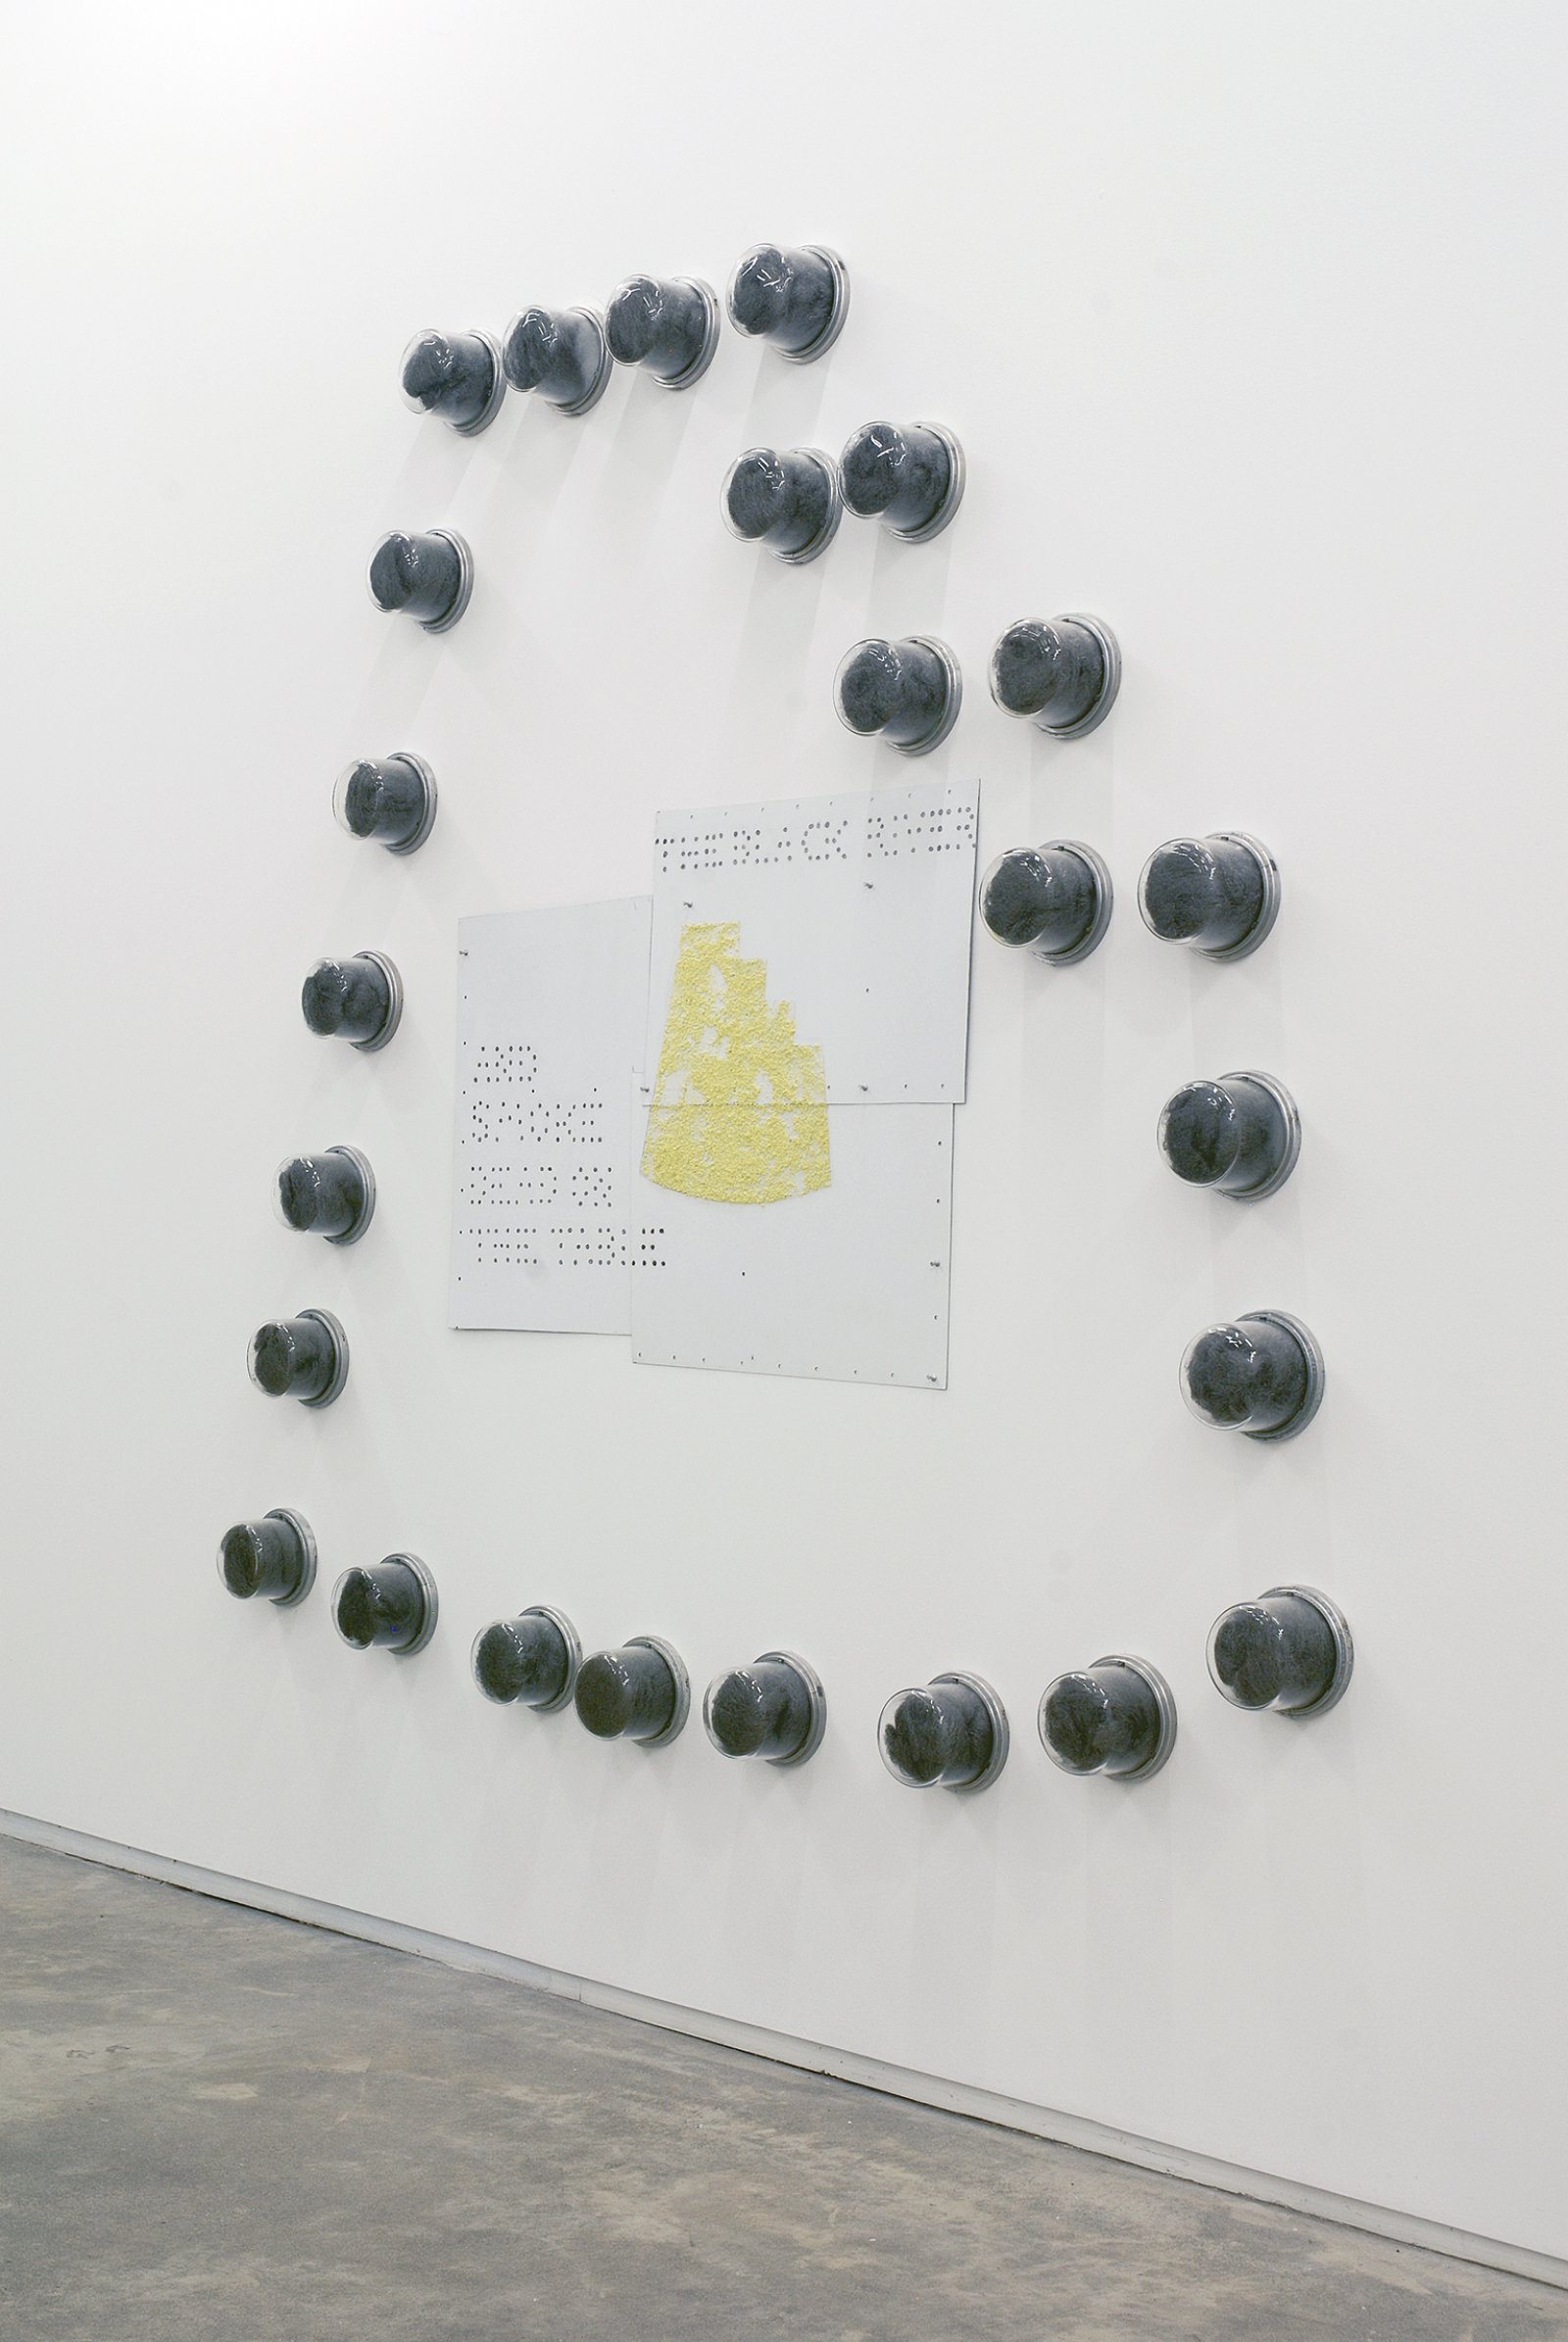 Jerry Pethick, The Last View, 1989, 22 meter covers, steel wool, aluminum, graphite, sulphur, aluminum push-pins, enamelled steel, 106 x 95 x 5 in. (270 x 240 x 12 cm)   by Jerry Pethick